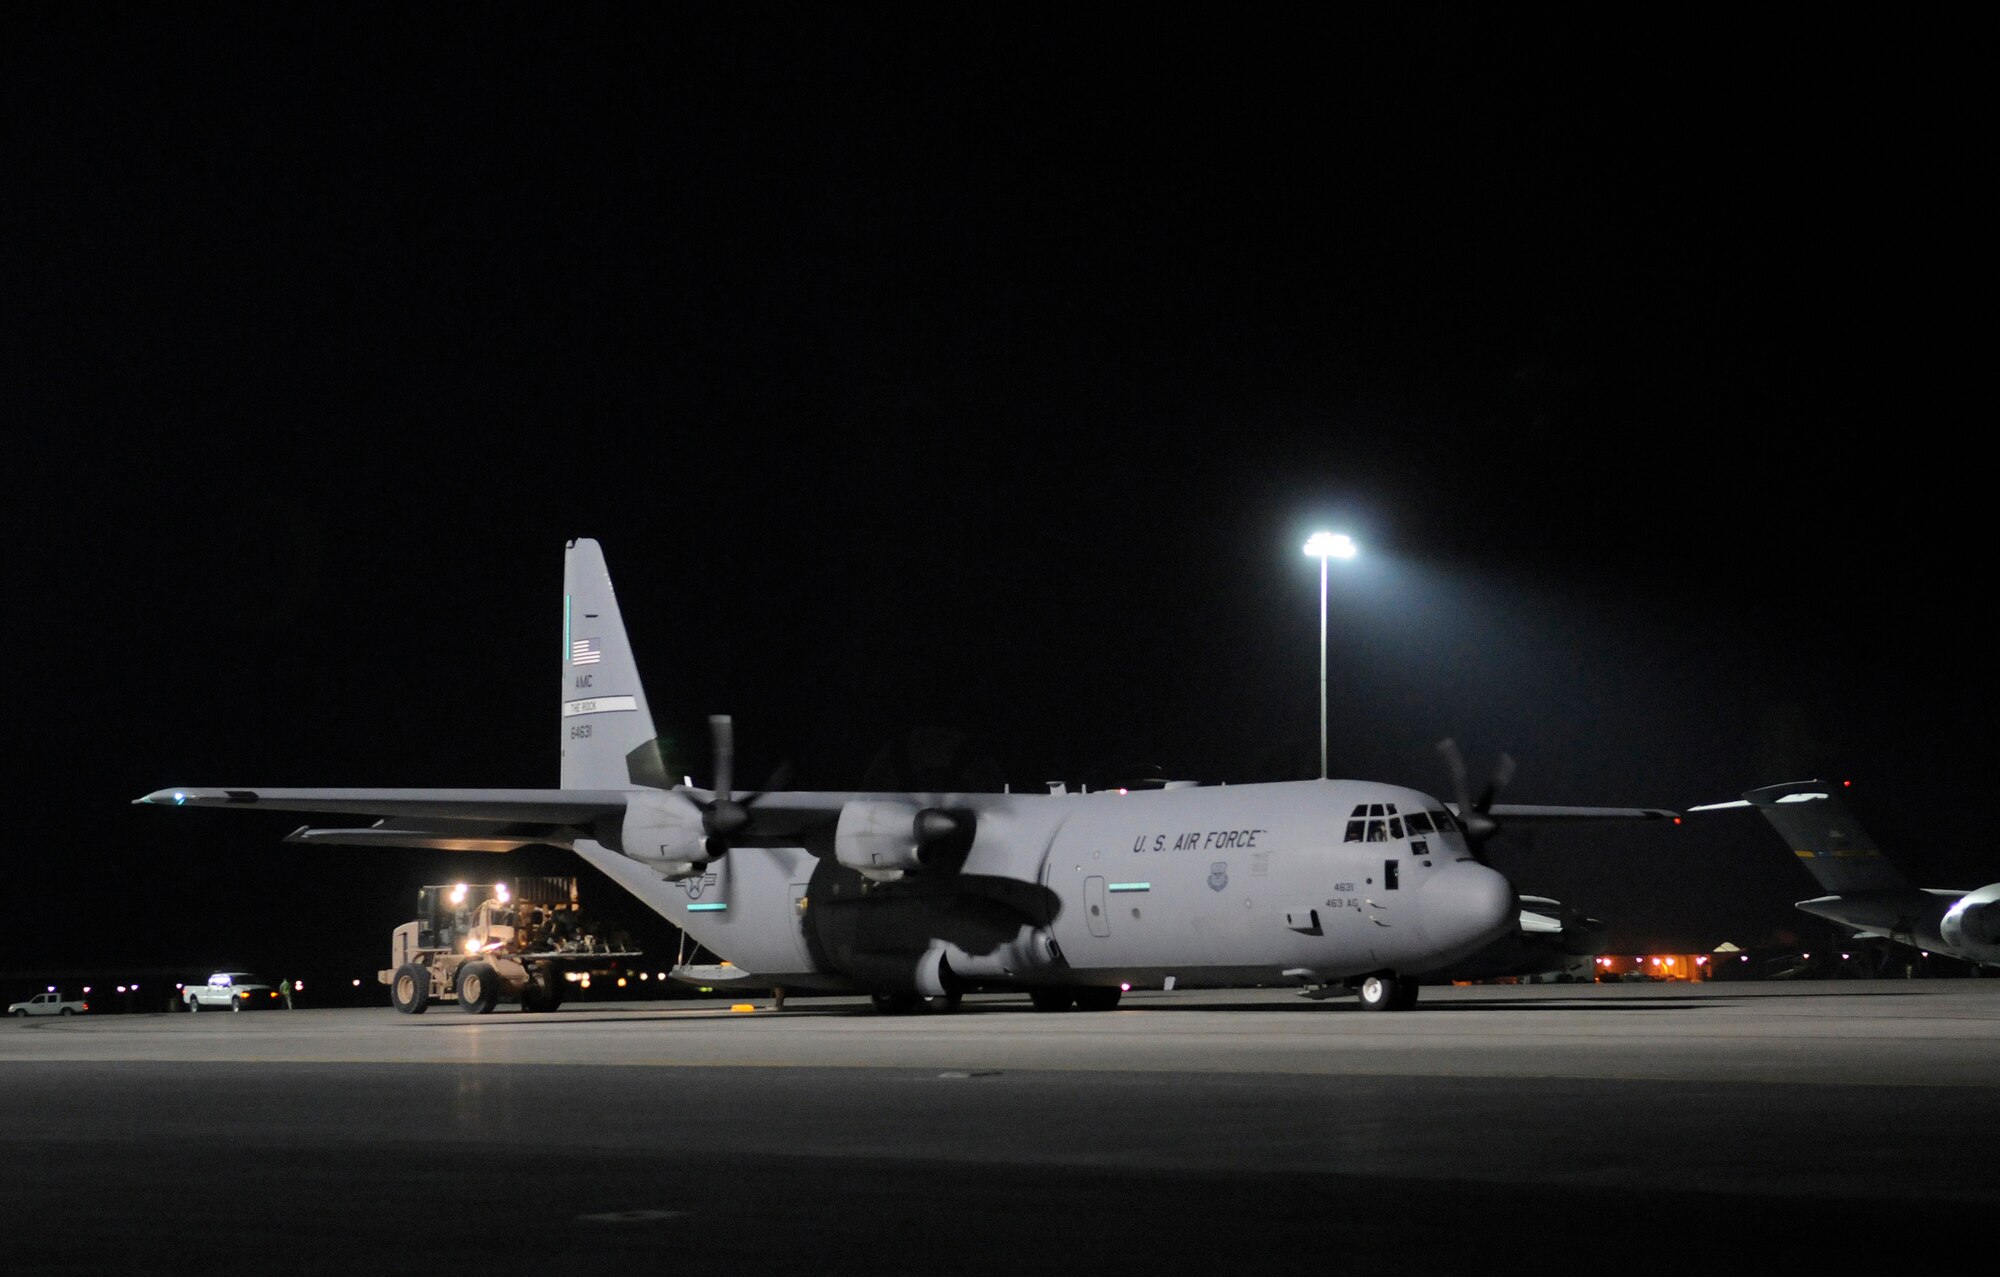 A C-130 Hercules is uploaded with increased safety and security from stadium lights on 120-foot masts, Nov. 17, at this undisclosed air base in Southwest Asia.  A total of 50 lights on 5 masts, bring safe lighting to the Central Command Area of Responsibility's busiest aerial port, in support of Operations Iraqi and Enduring Freedom and Joint Task Force-Horn of Africa.  (U.S. Air Force photo by Tech. Sgt. Michael Boquette/Released)